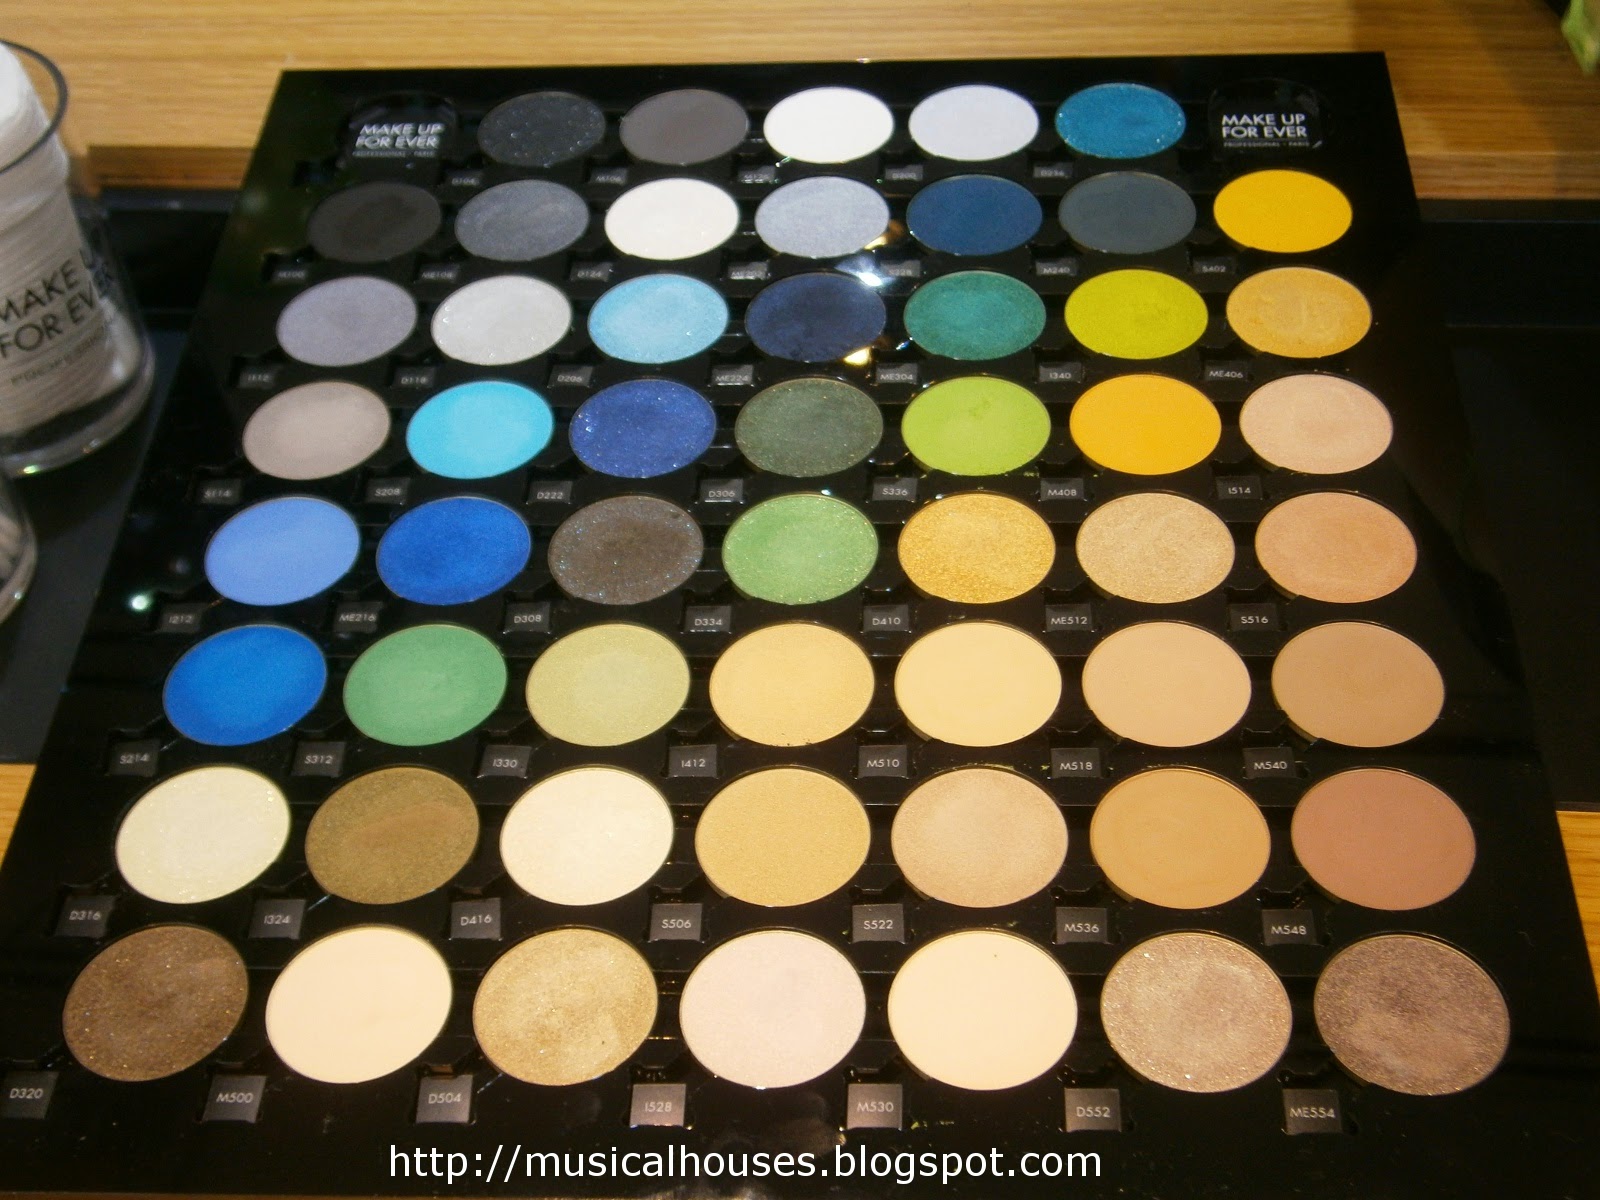 Review & Swatches: Make Up For Ever (MUFE) 9 Artist Shadow Palette